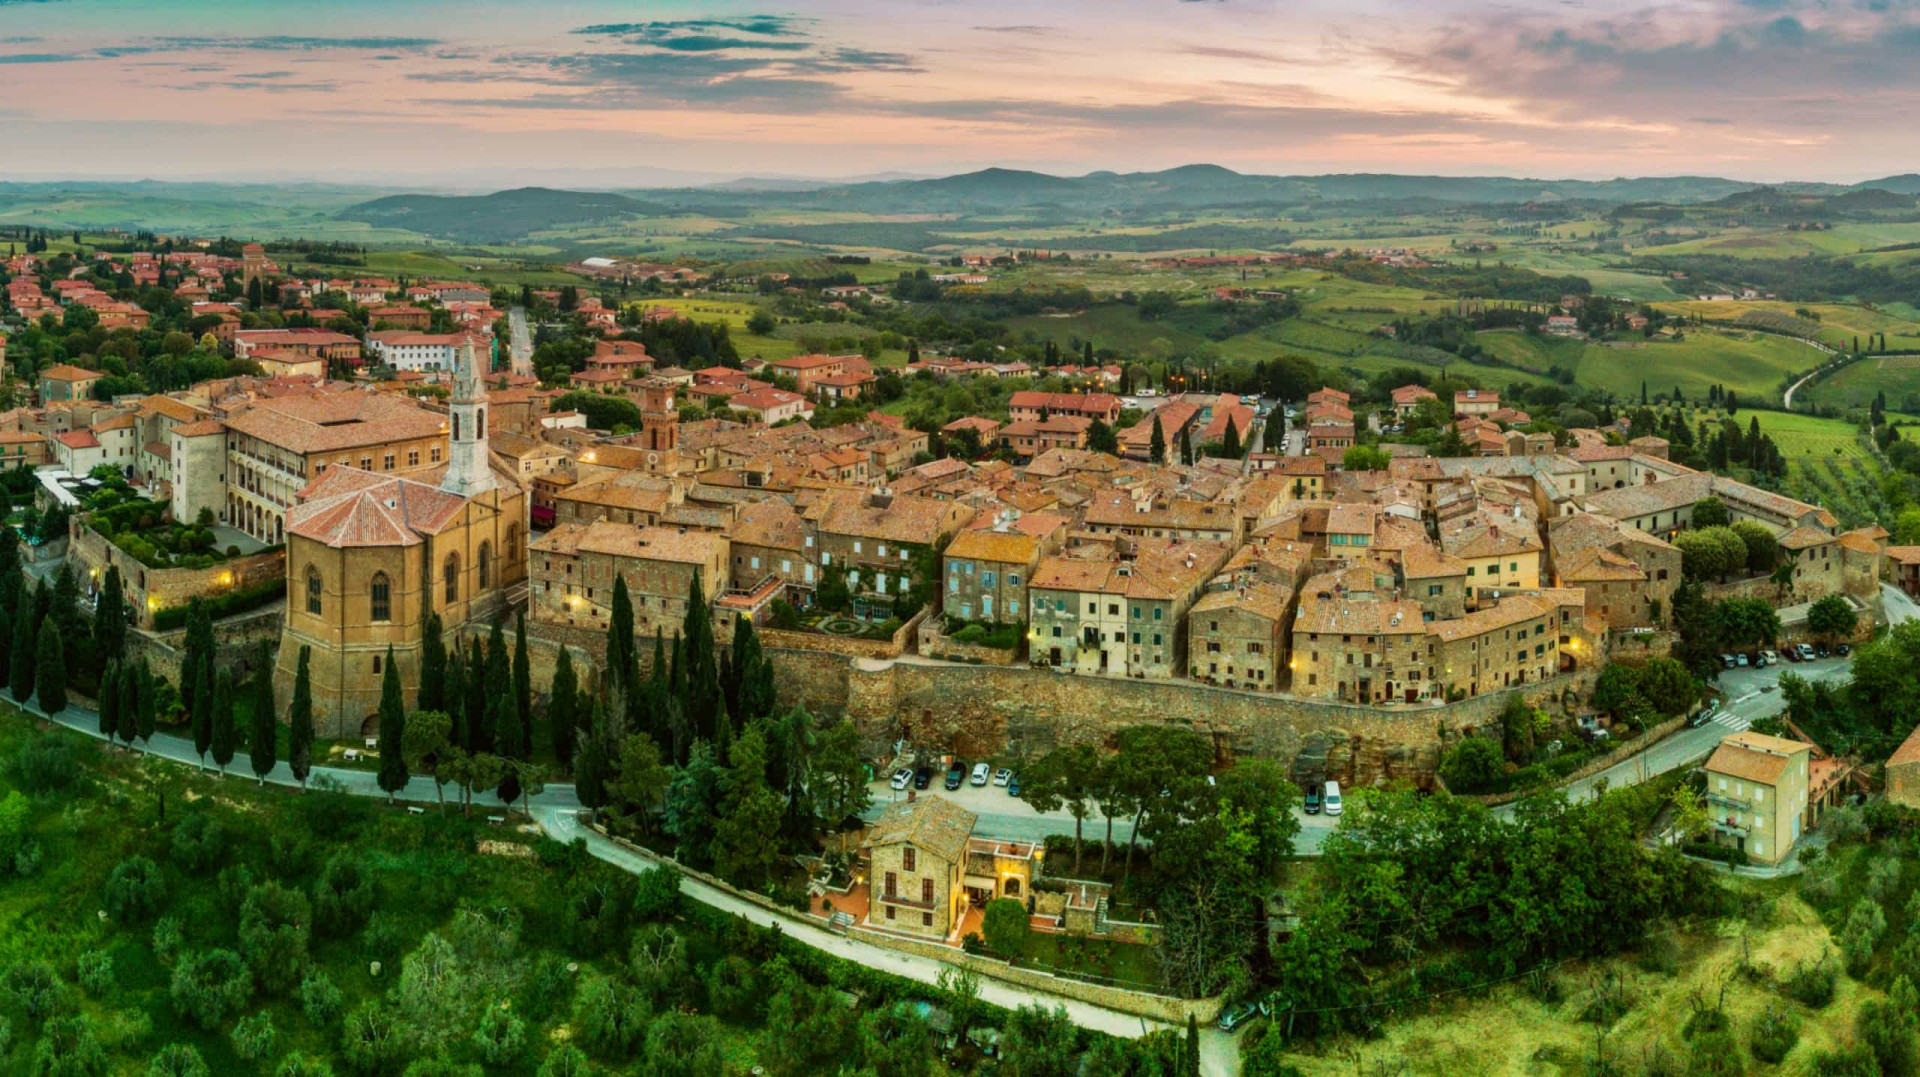 <p>Hilltop Pienza is set in the heart of the historical region of Val d'Orcia. It is known for its Renaissance architecture and pecorino, a prized local cheese.</p>